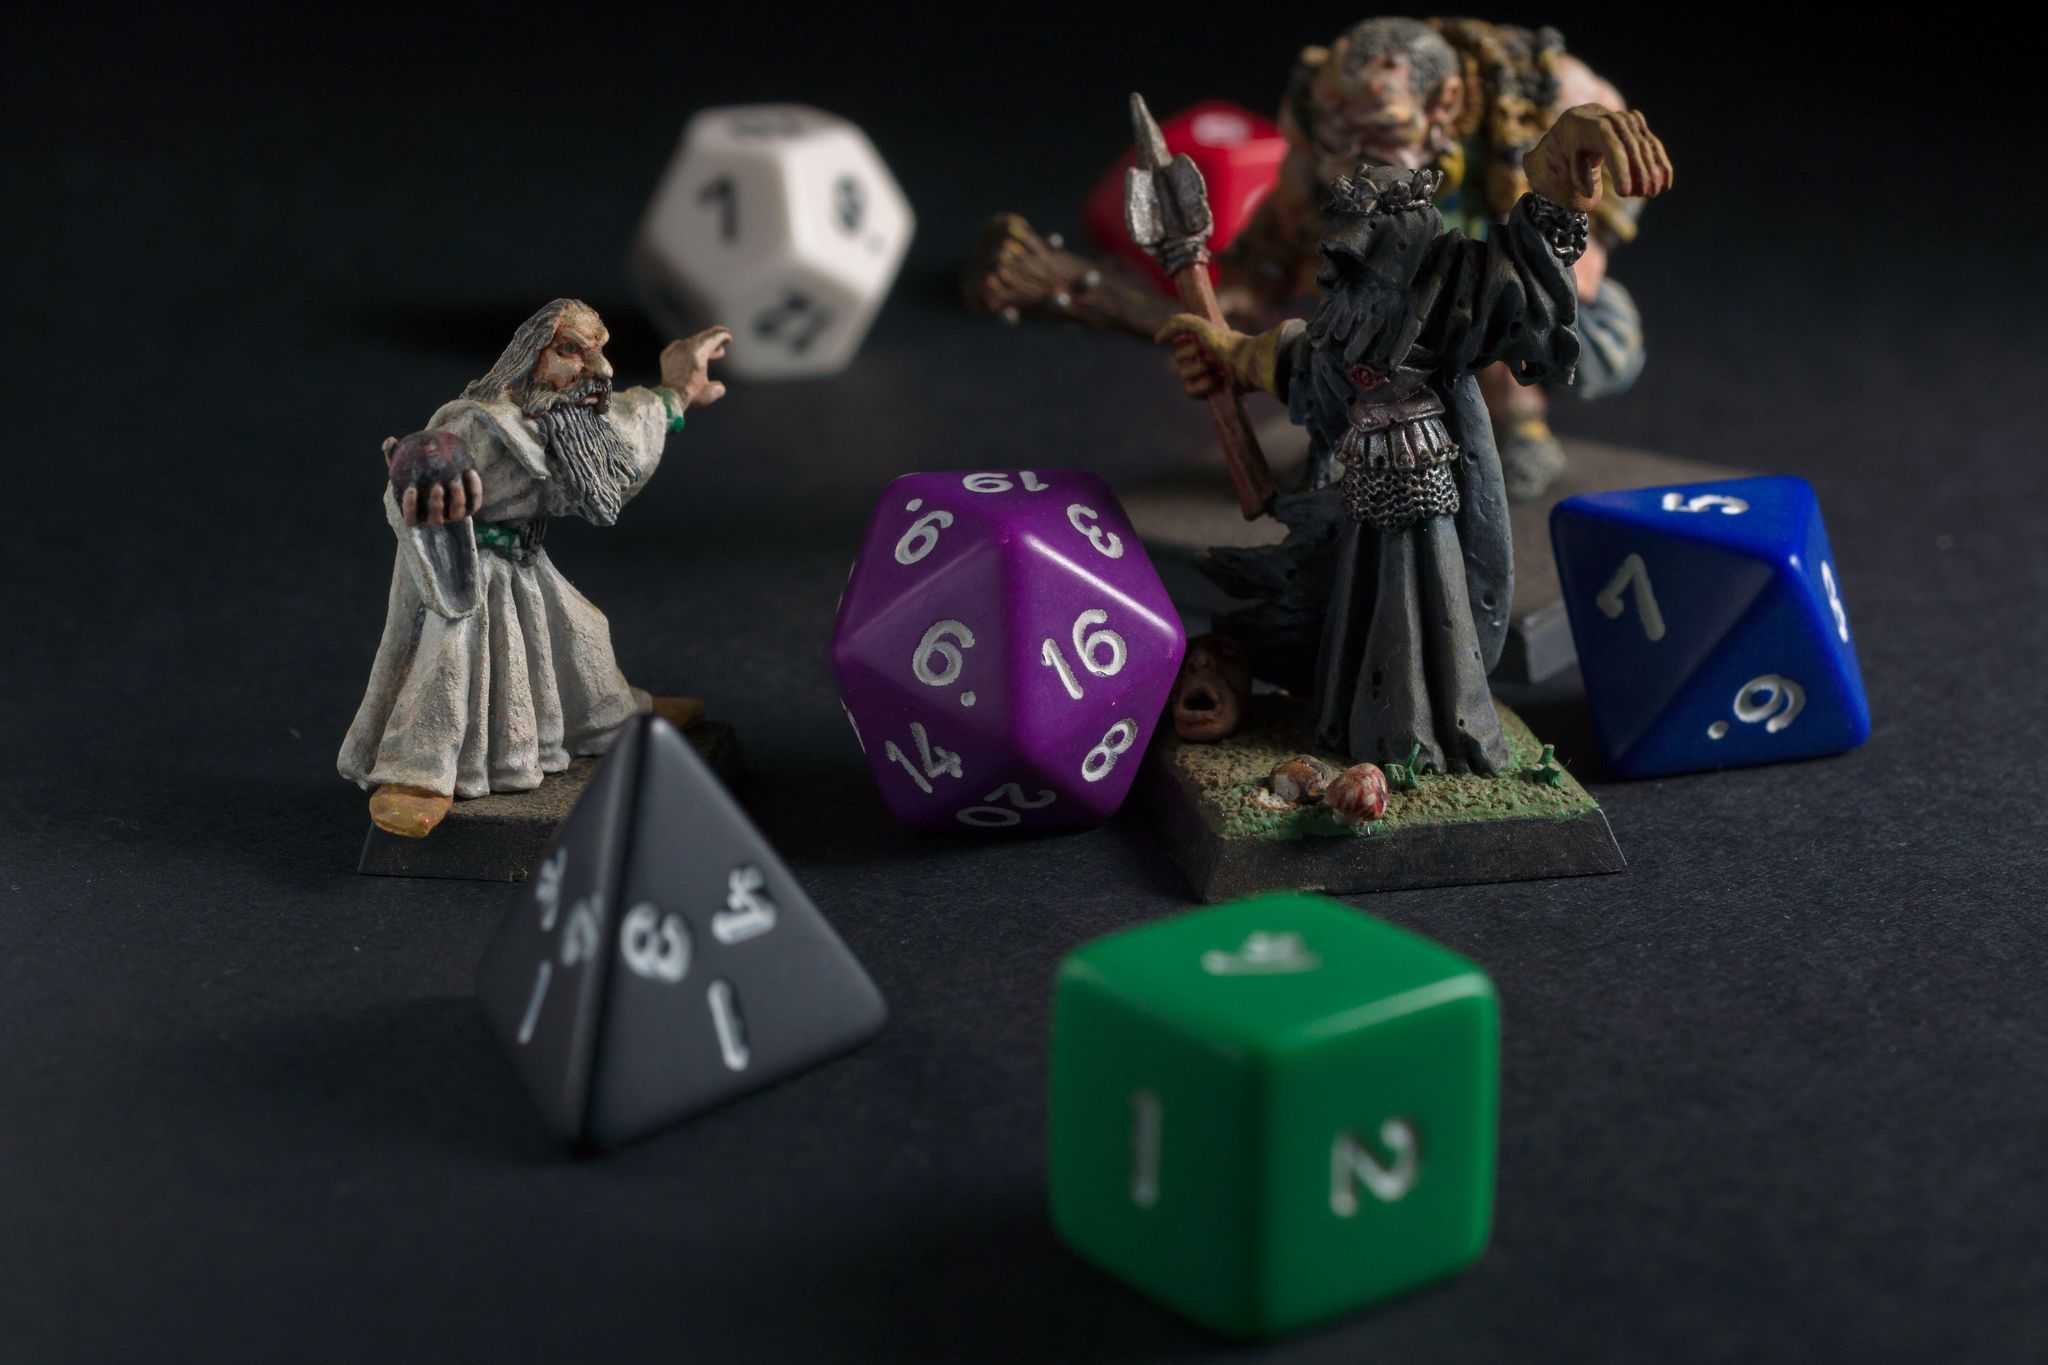 2e6j587 dungeons and dragons dice and hand painted lead figures produced by games workshop in 1983 as accessories to the game